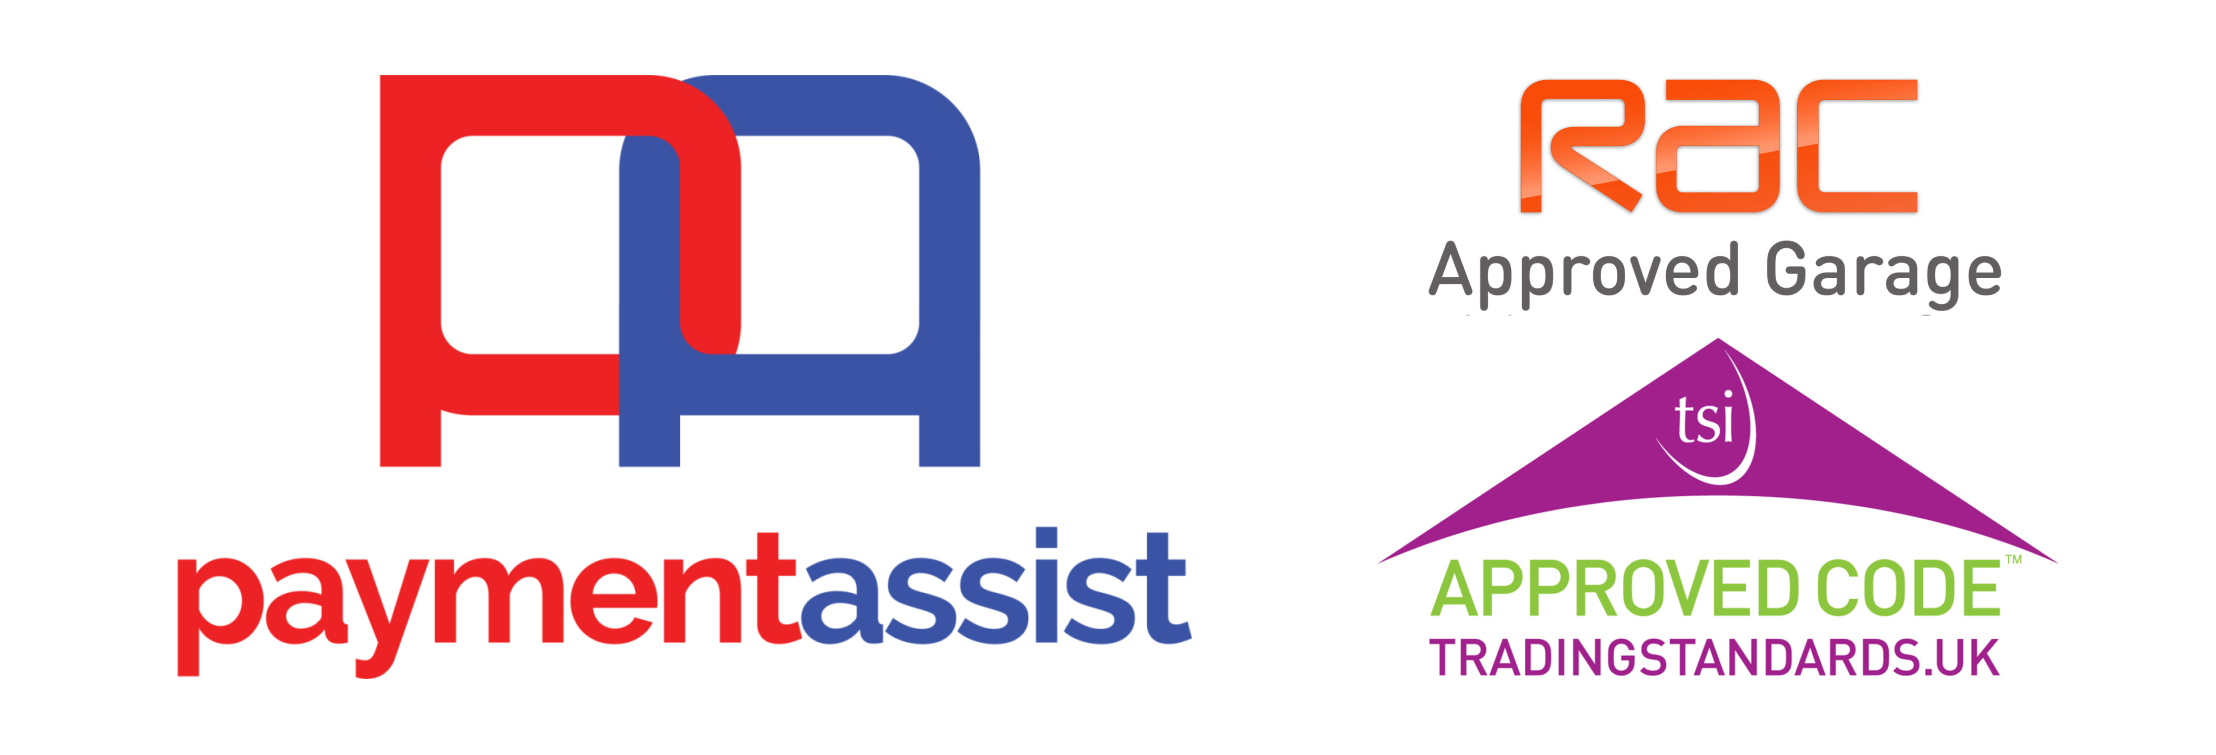 Logos of AA Approved, Payment Assist and RAC Approved Garage